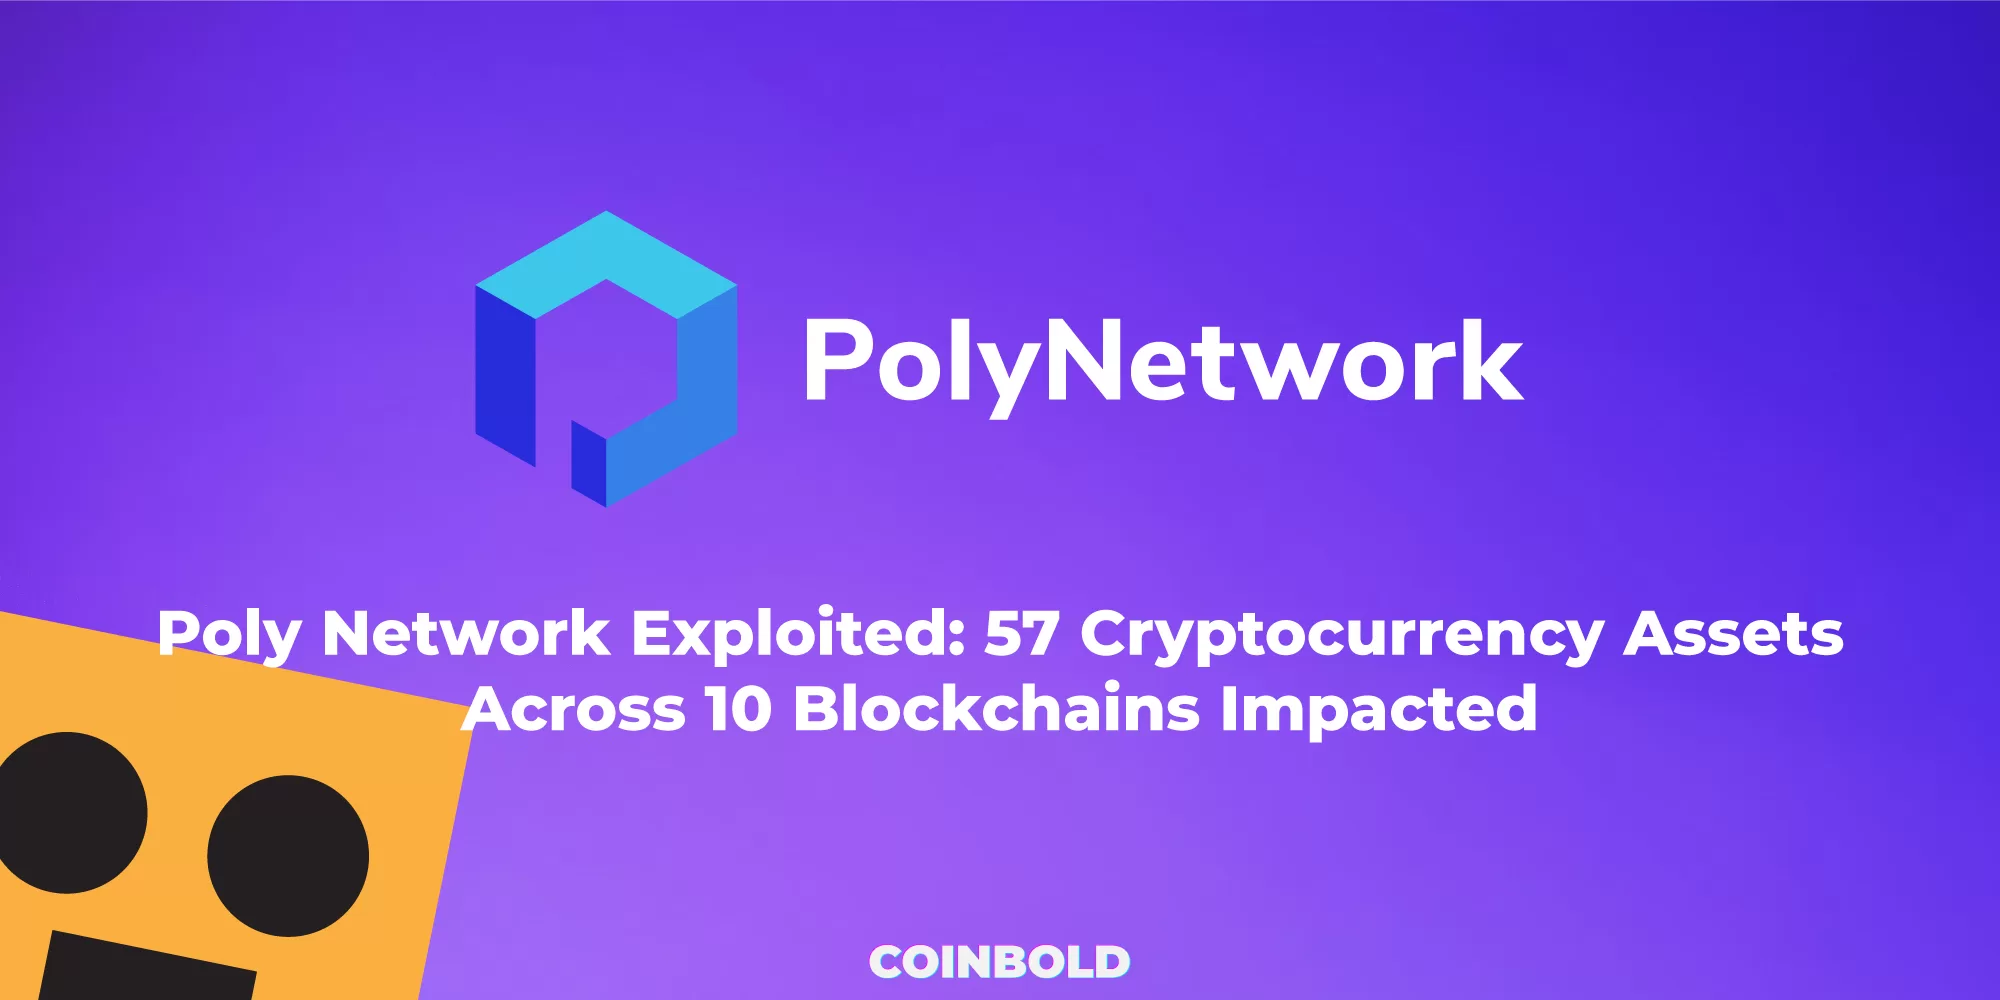 Poly Network Exploited: 57 Cryptocurrency Assets Across 10 Blockchains Impacted